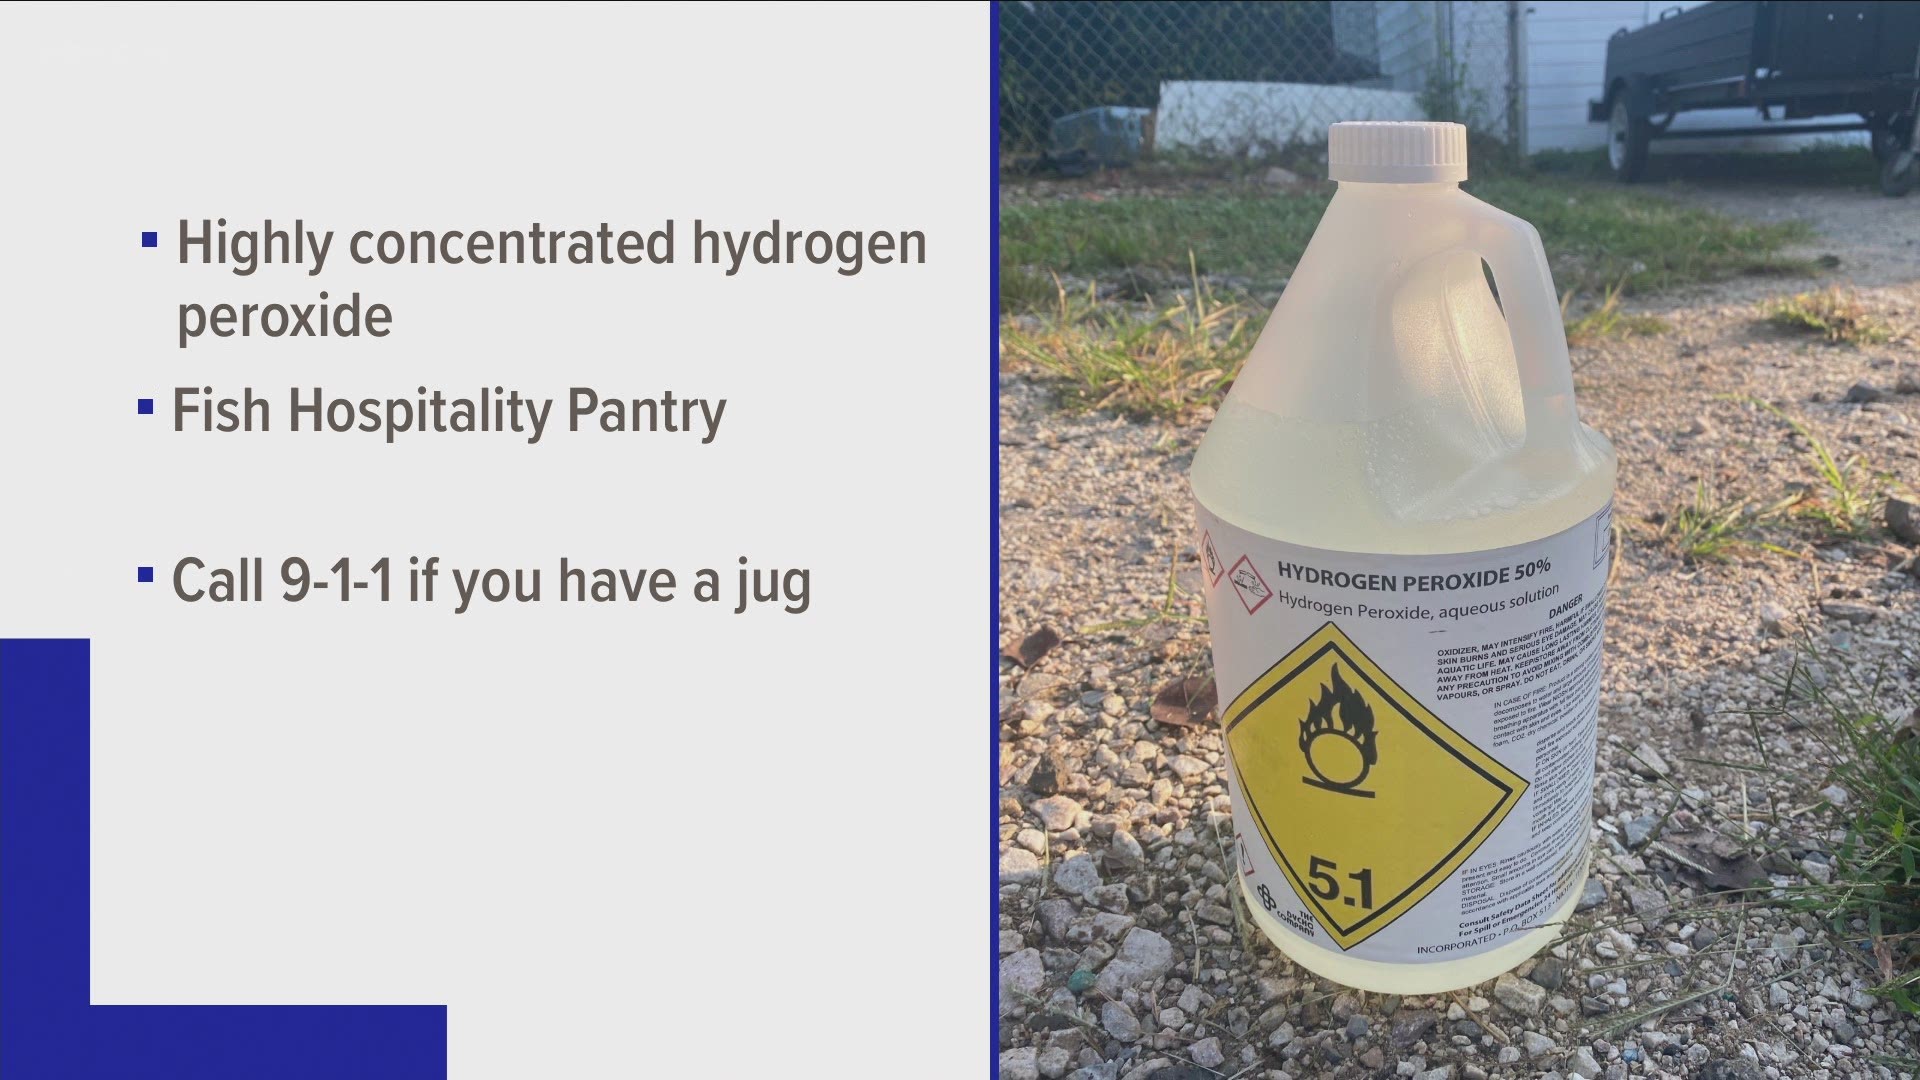 The Knoxville Fire Department said 54 jugs of highly concentrated hydrogen peroxide were distributed at the fish hospitality pantry yesterday.